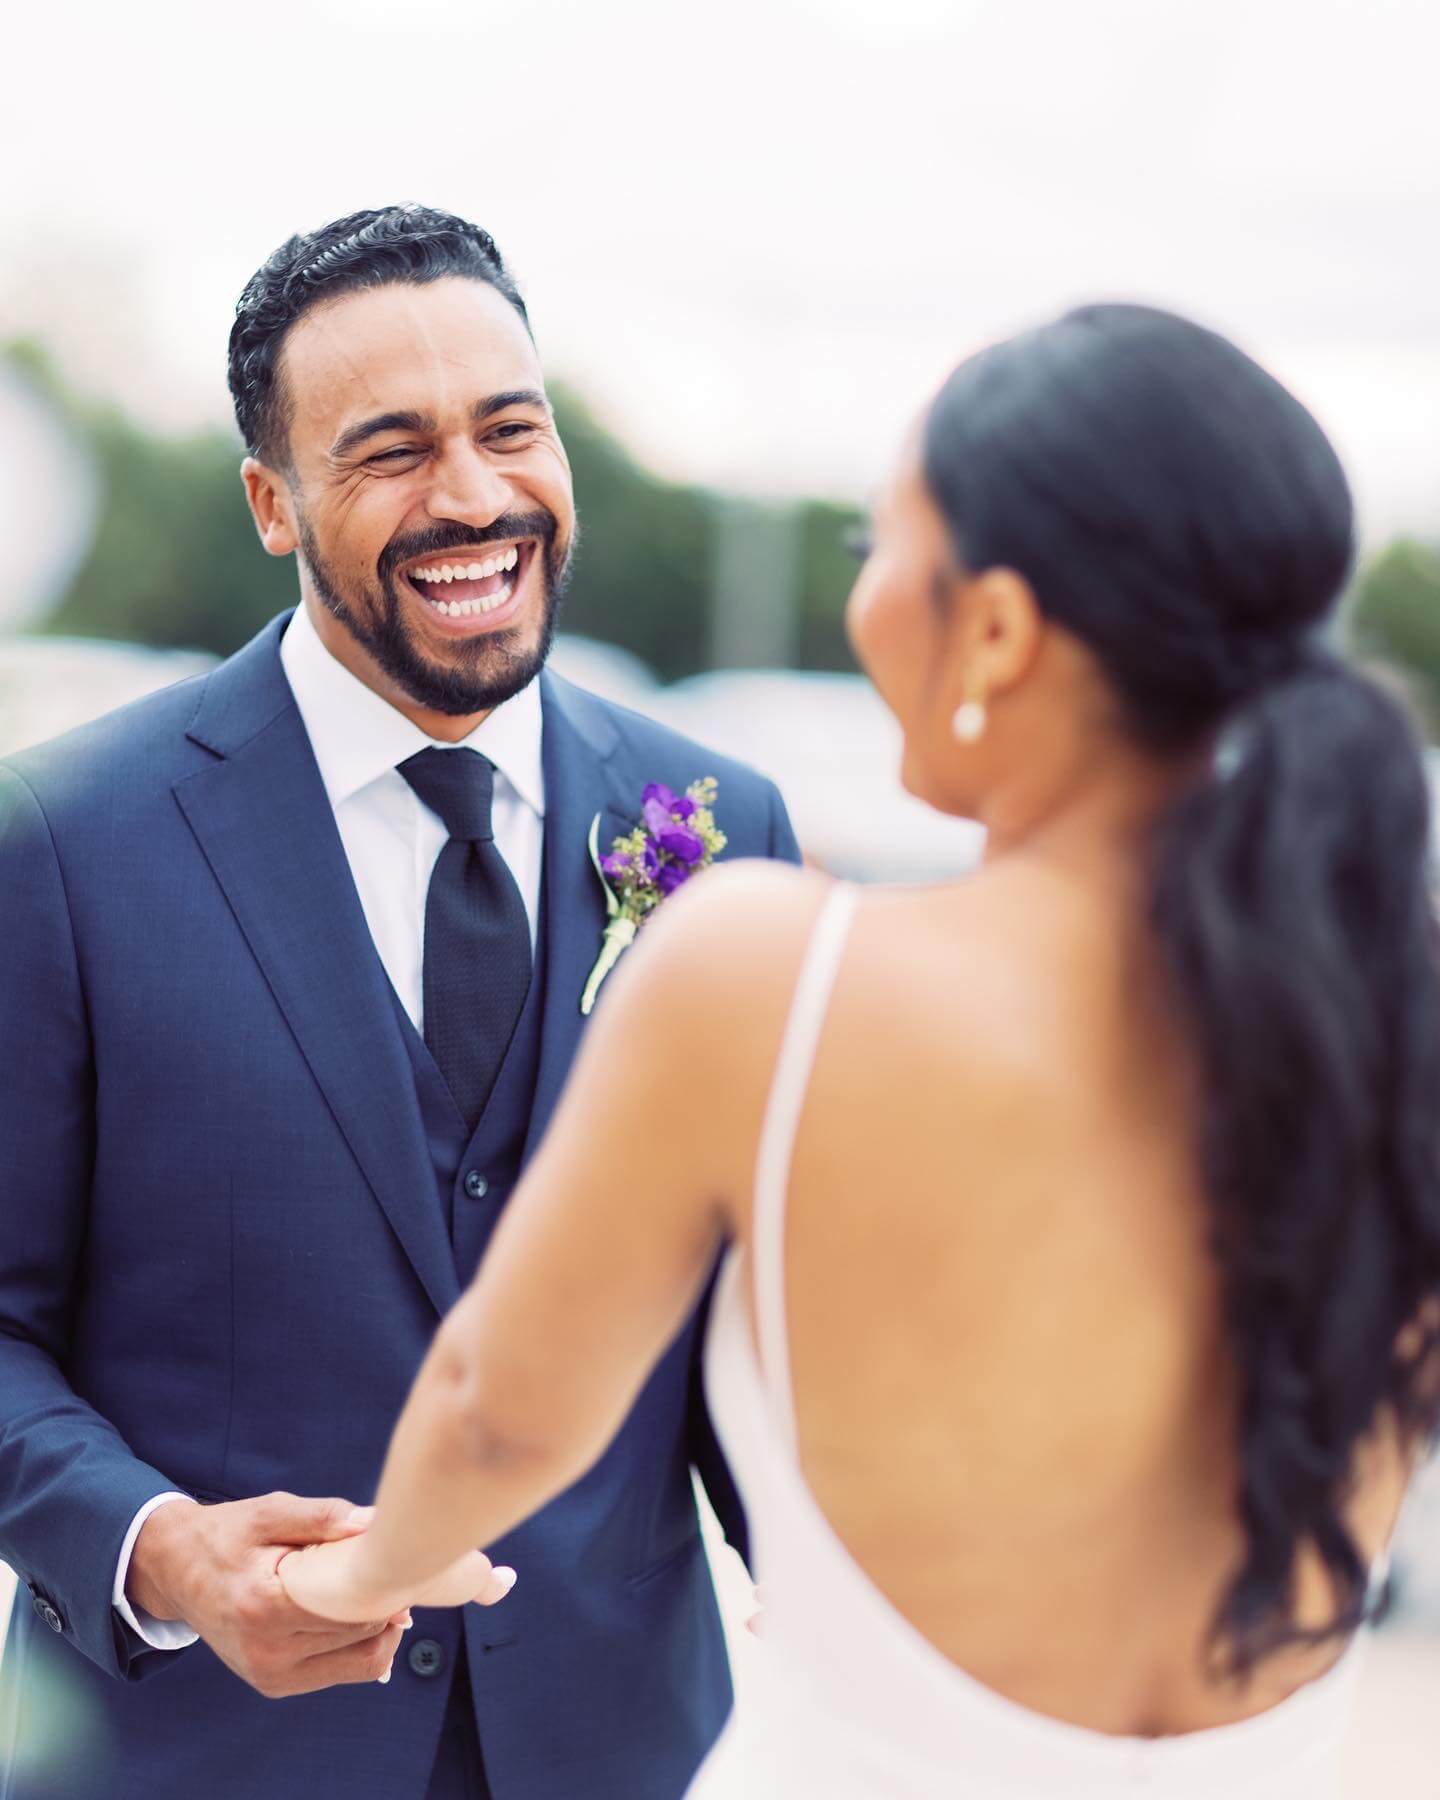 Grooms sweet reaction at first look